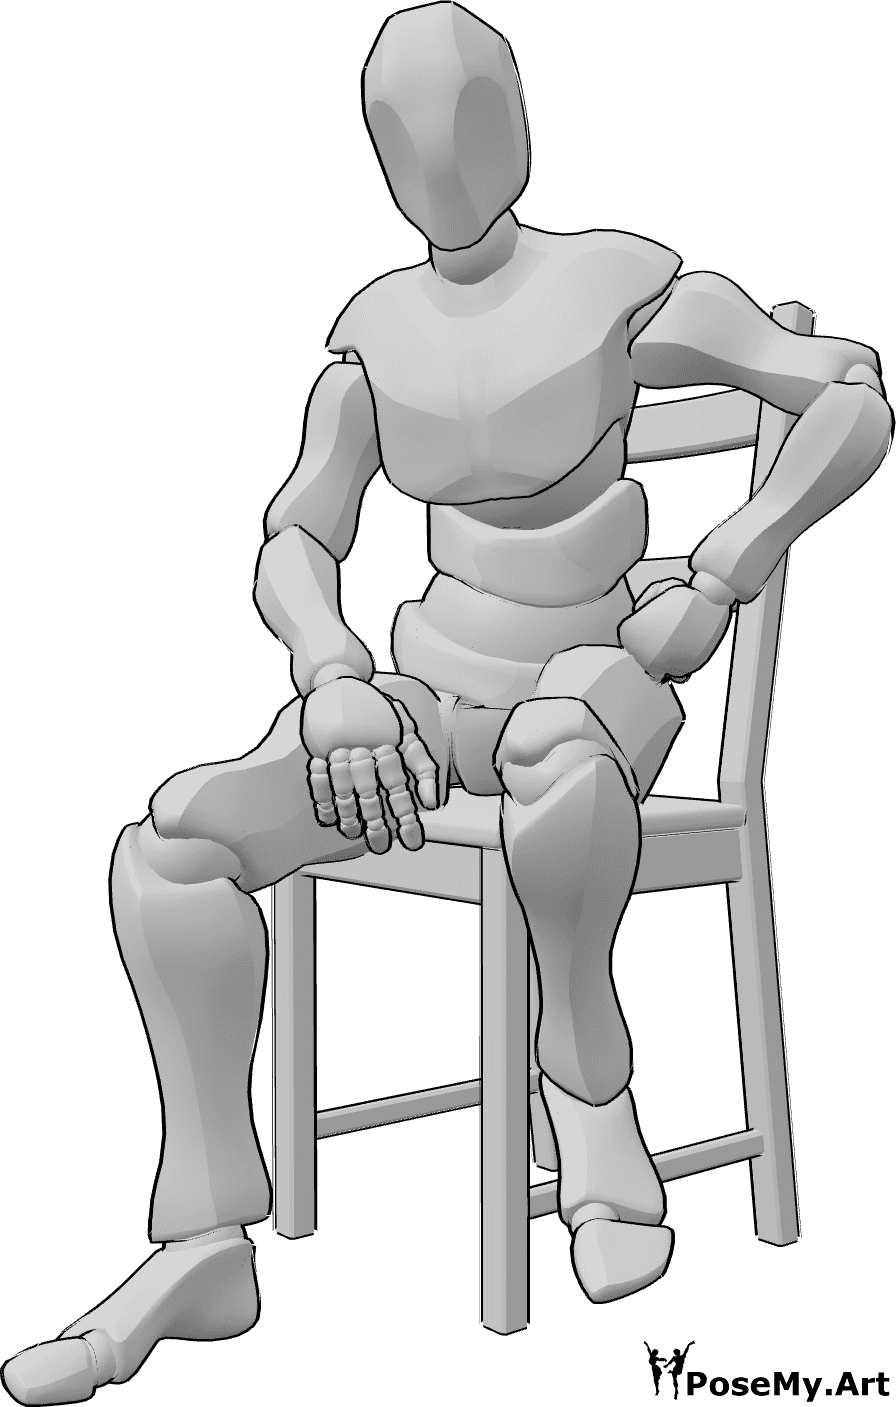 Pose Reference - Sitting hand hip pose - Male is sitting on a chair with one hand on hip, male model pose